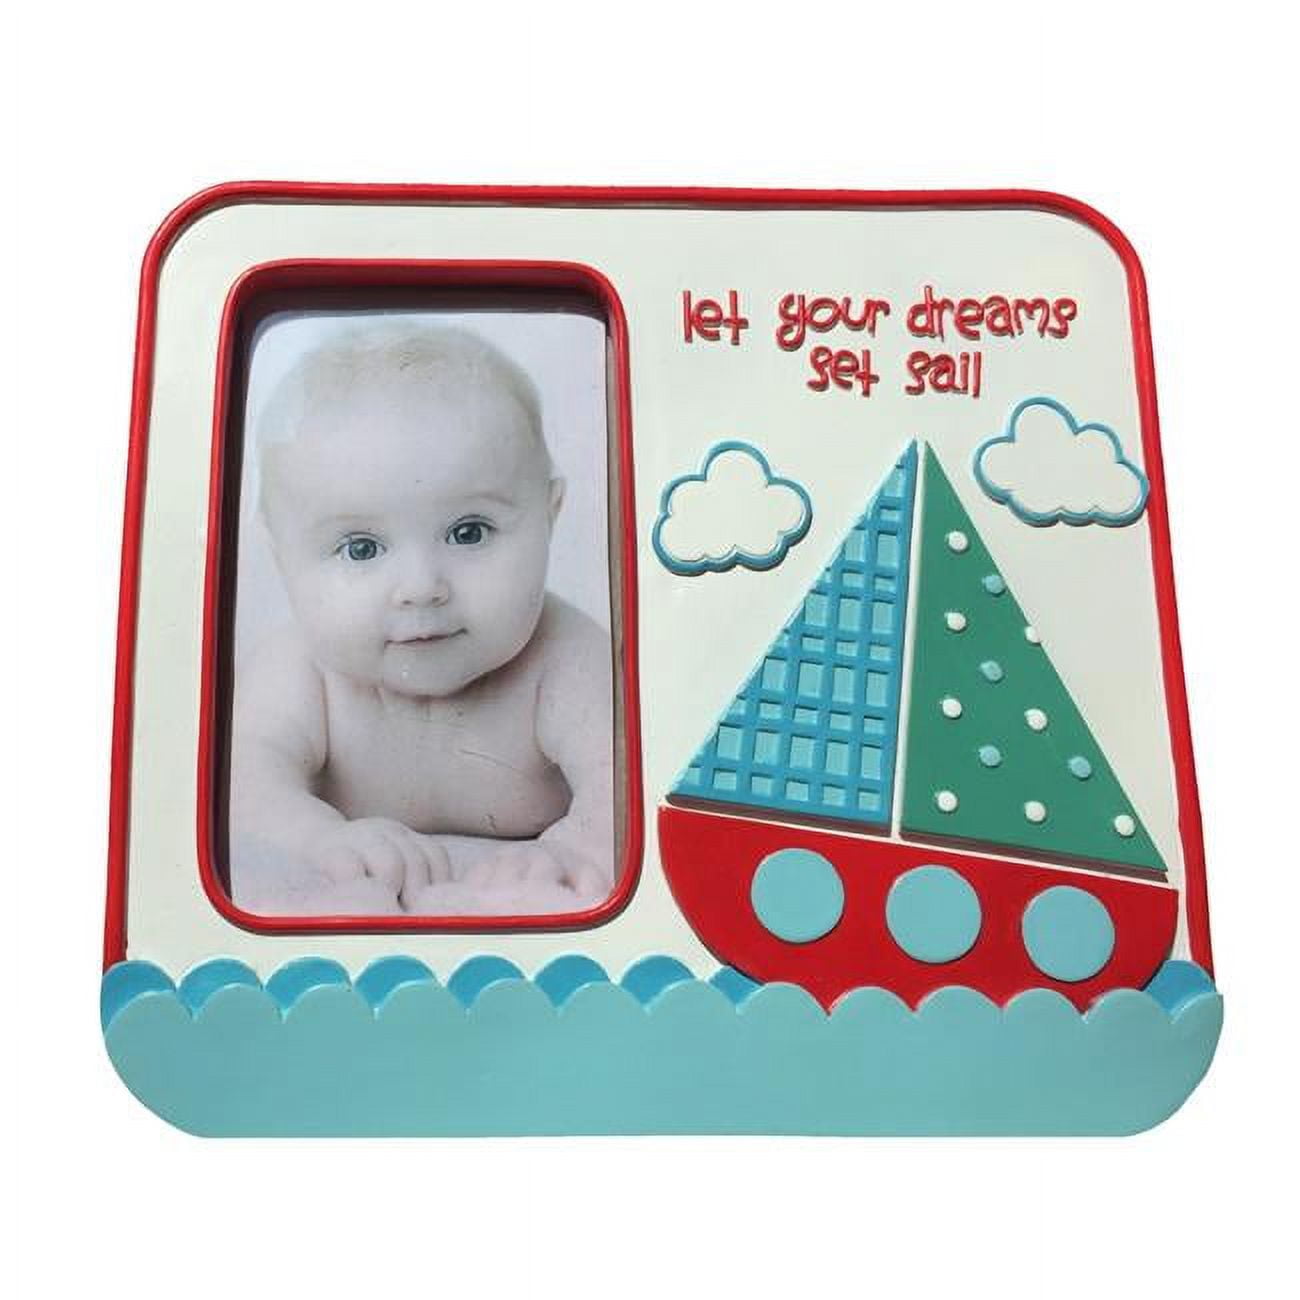 90008 3.23 X 5.2 In. Ahoy Picture Frame